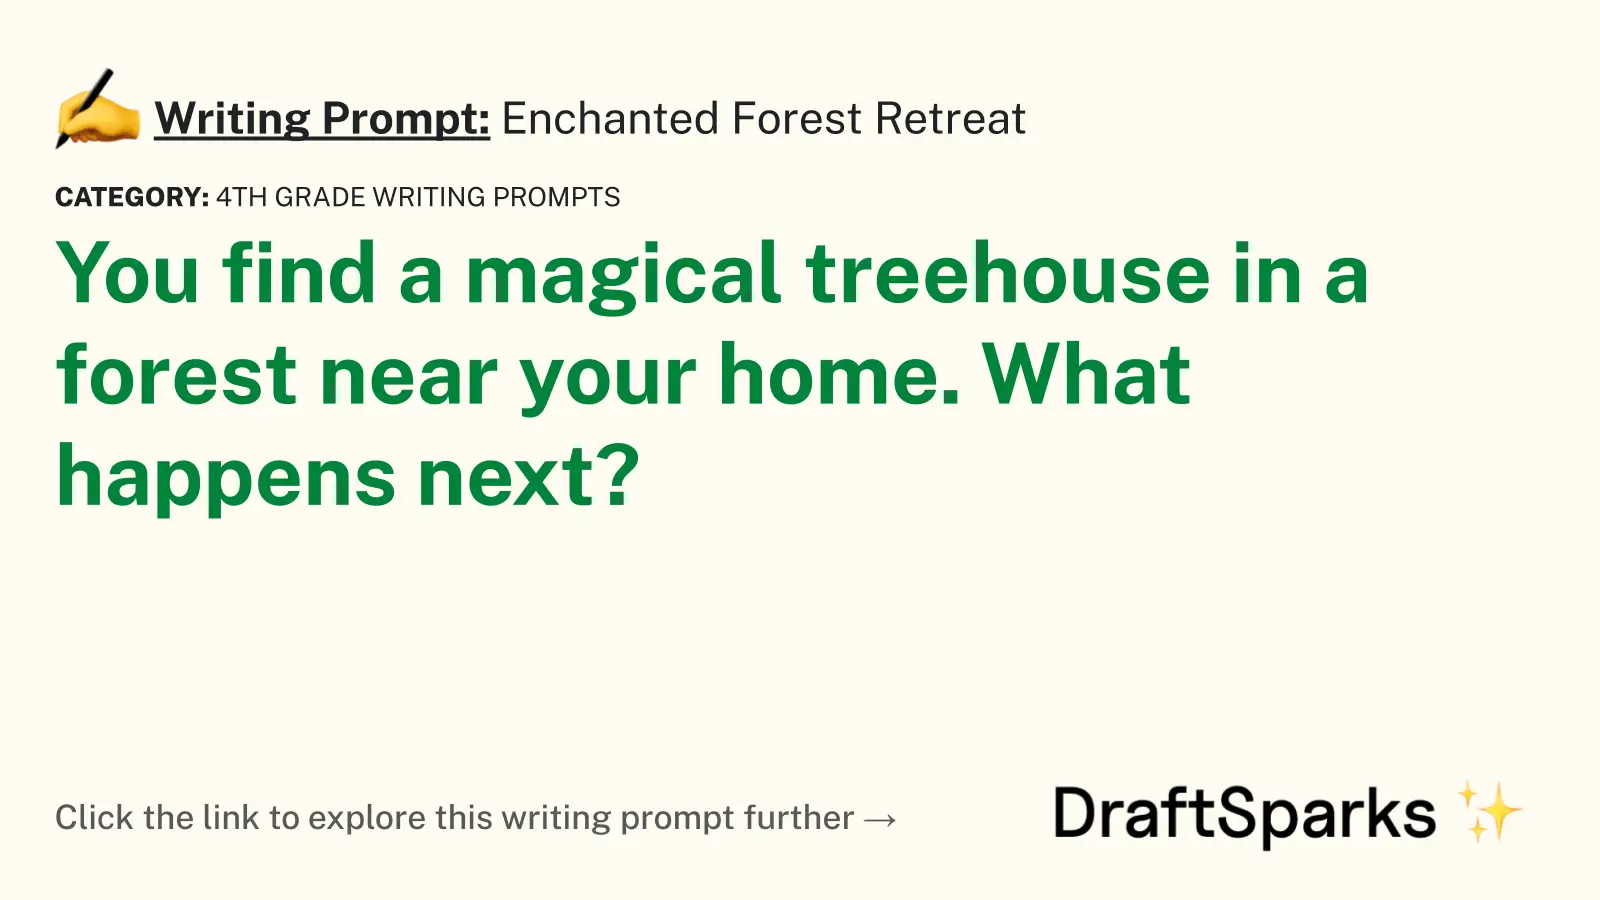 Enchanted Forest Retreat